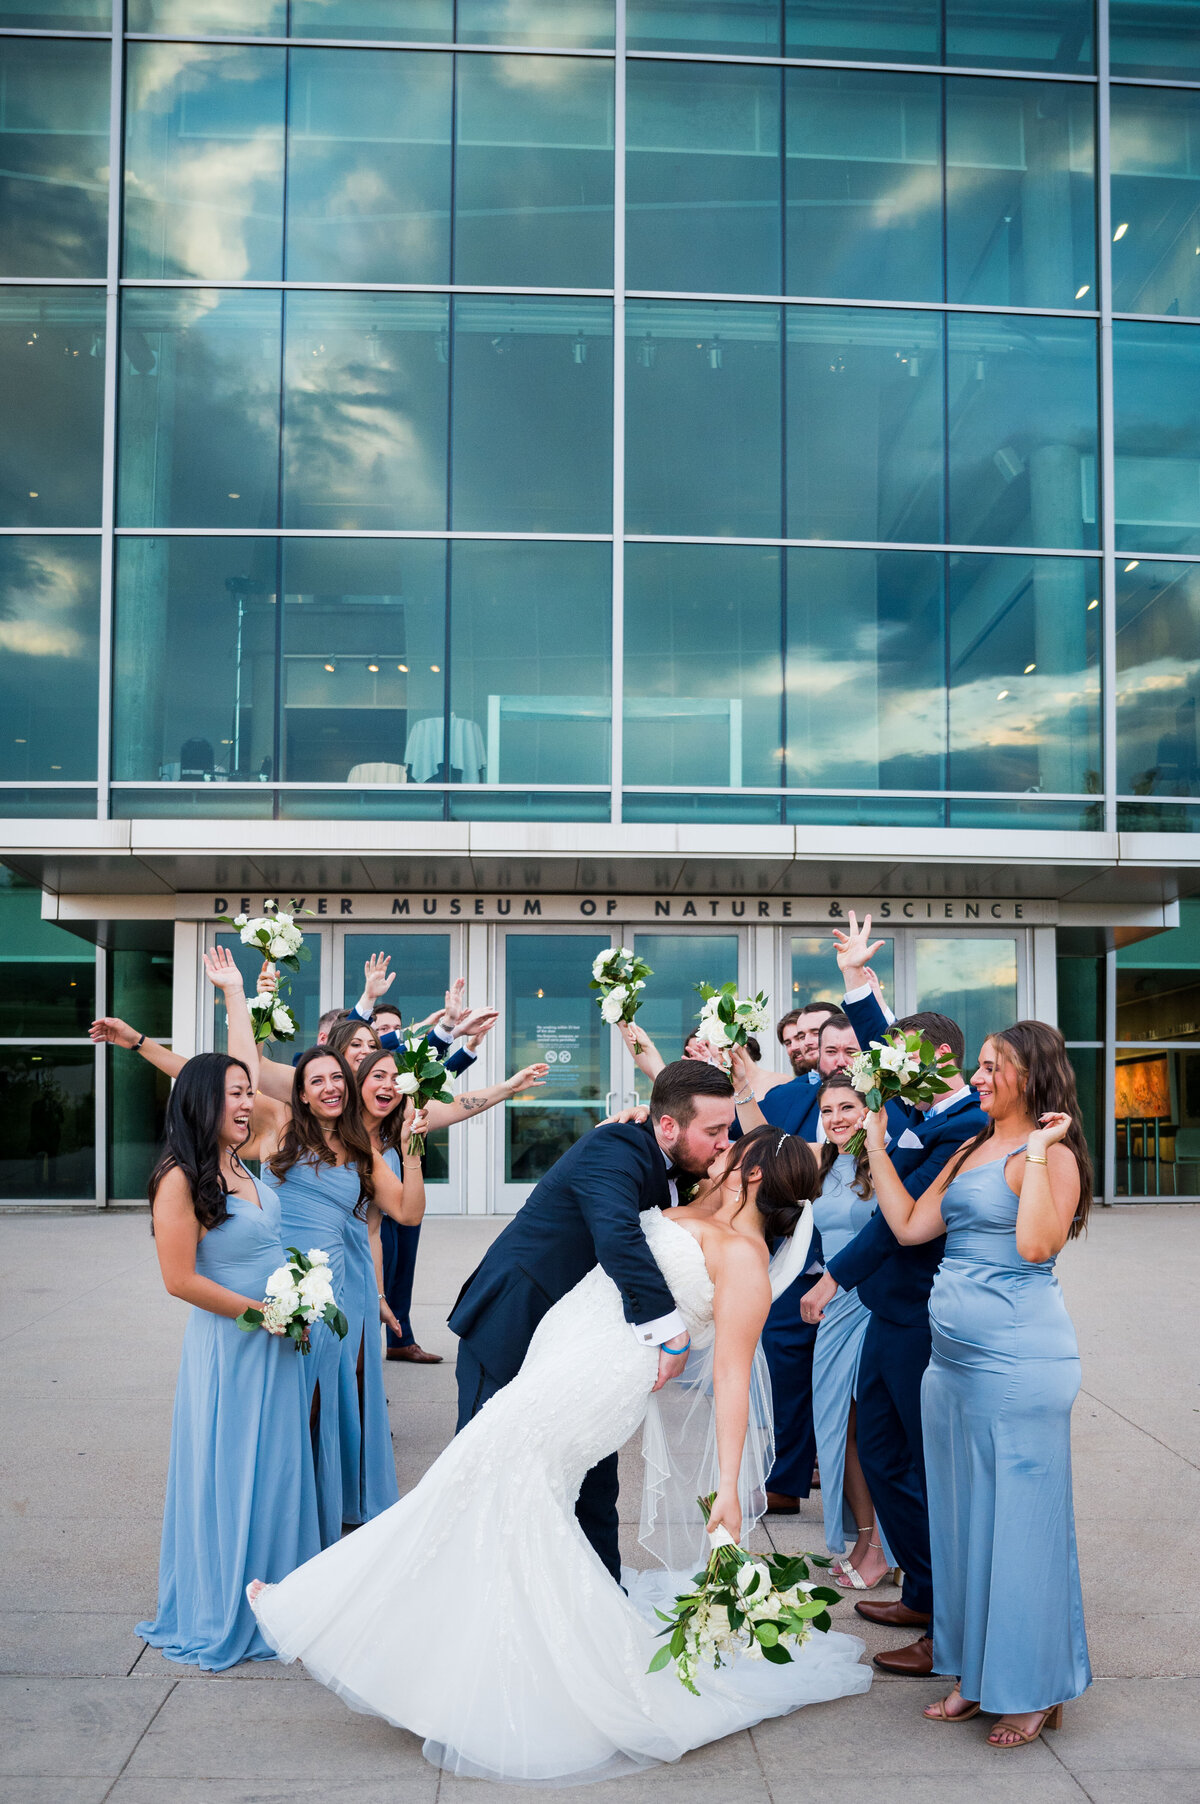 A groom dips his bride for a kiss with half of the wedding party on one side and half on the other in front of The Denver Museum of Nature and Science.